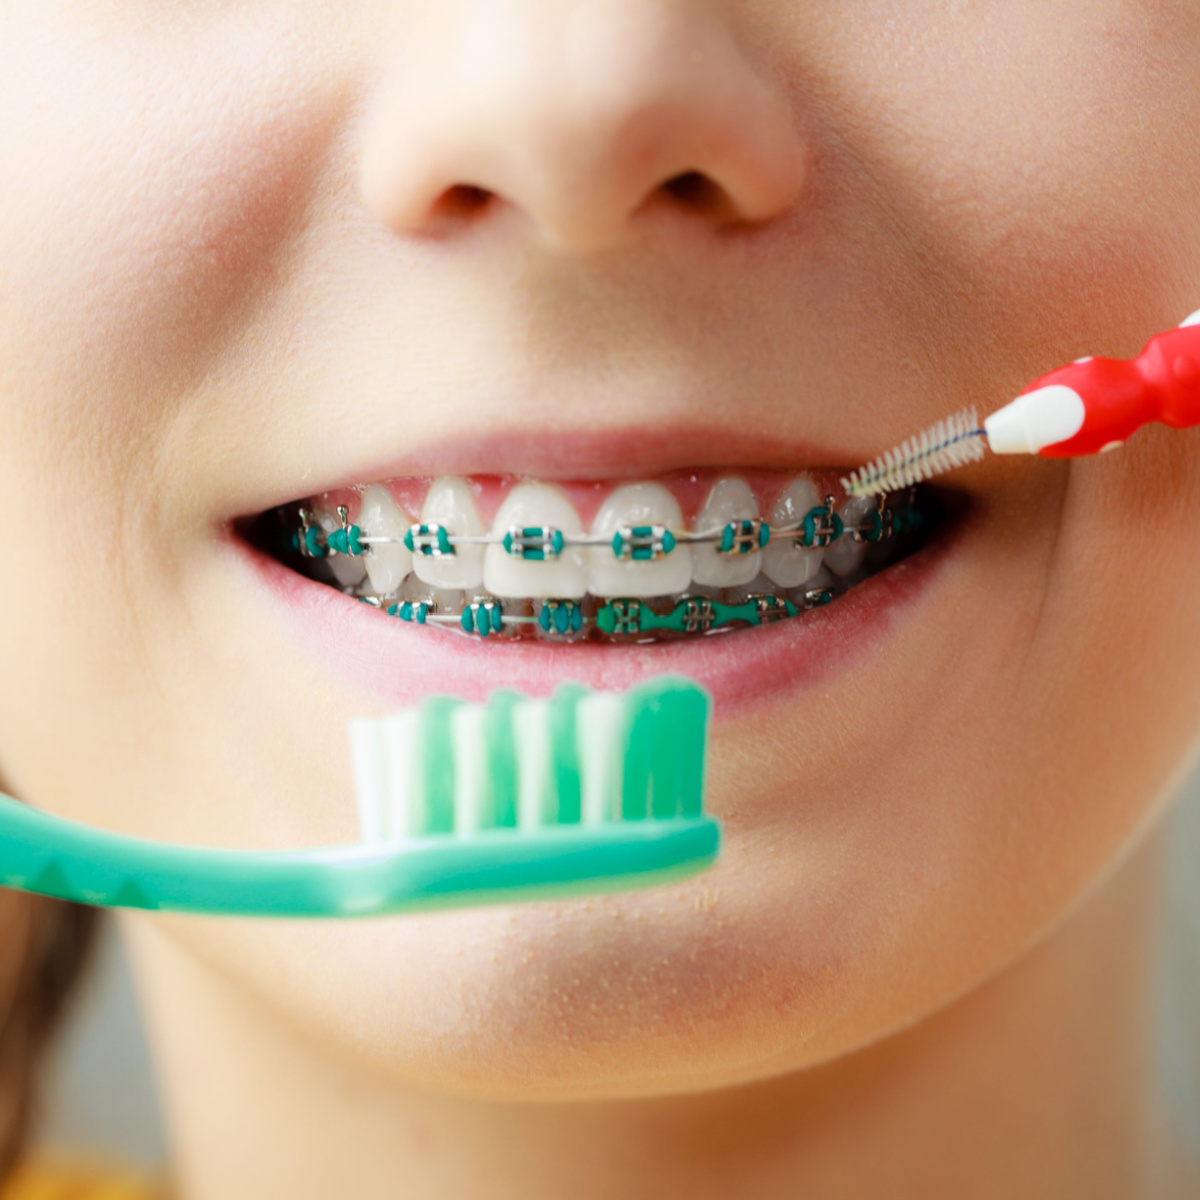 The Importance of Proper Hygiene and Dental Check-Ups When Wearing South Houston Braces